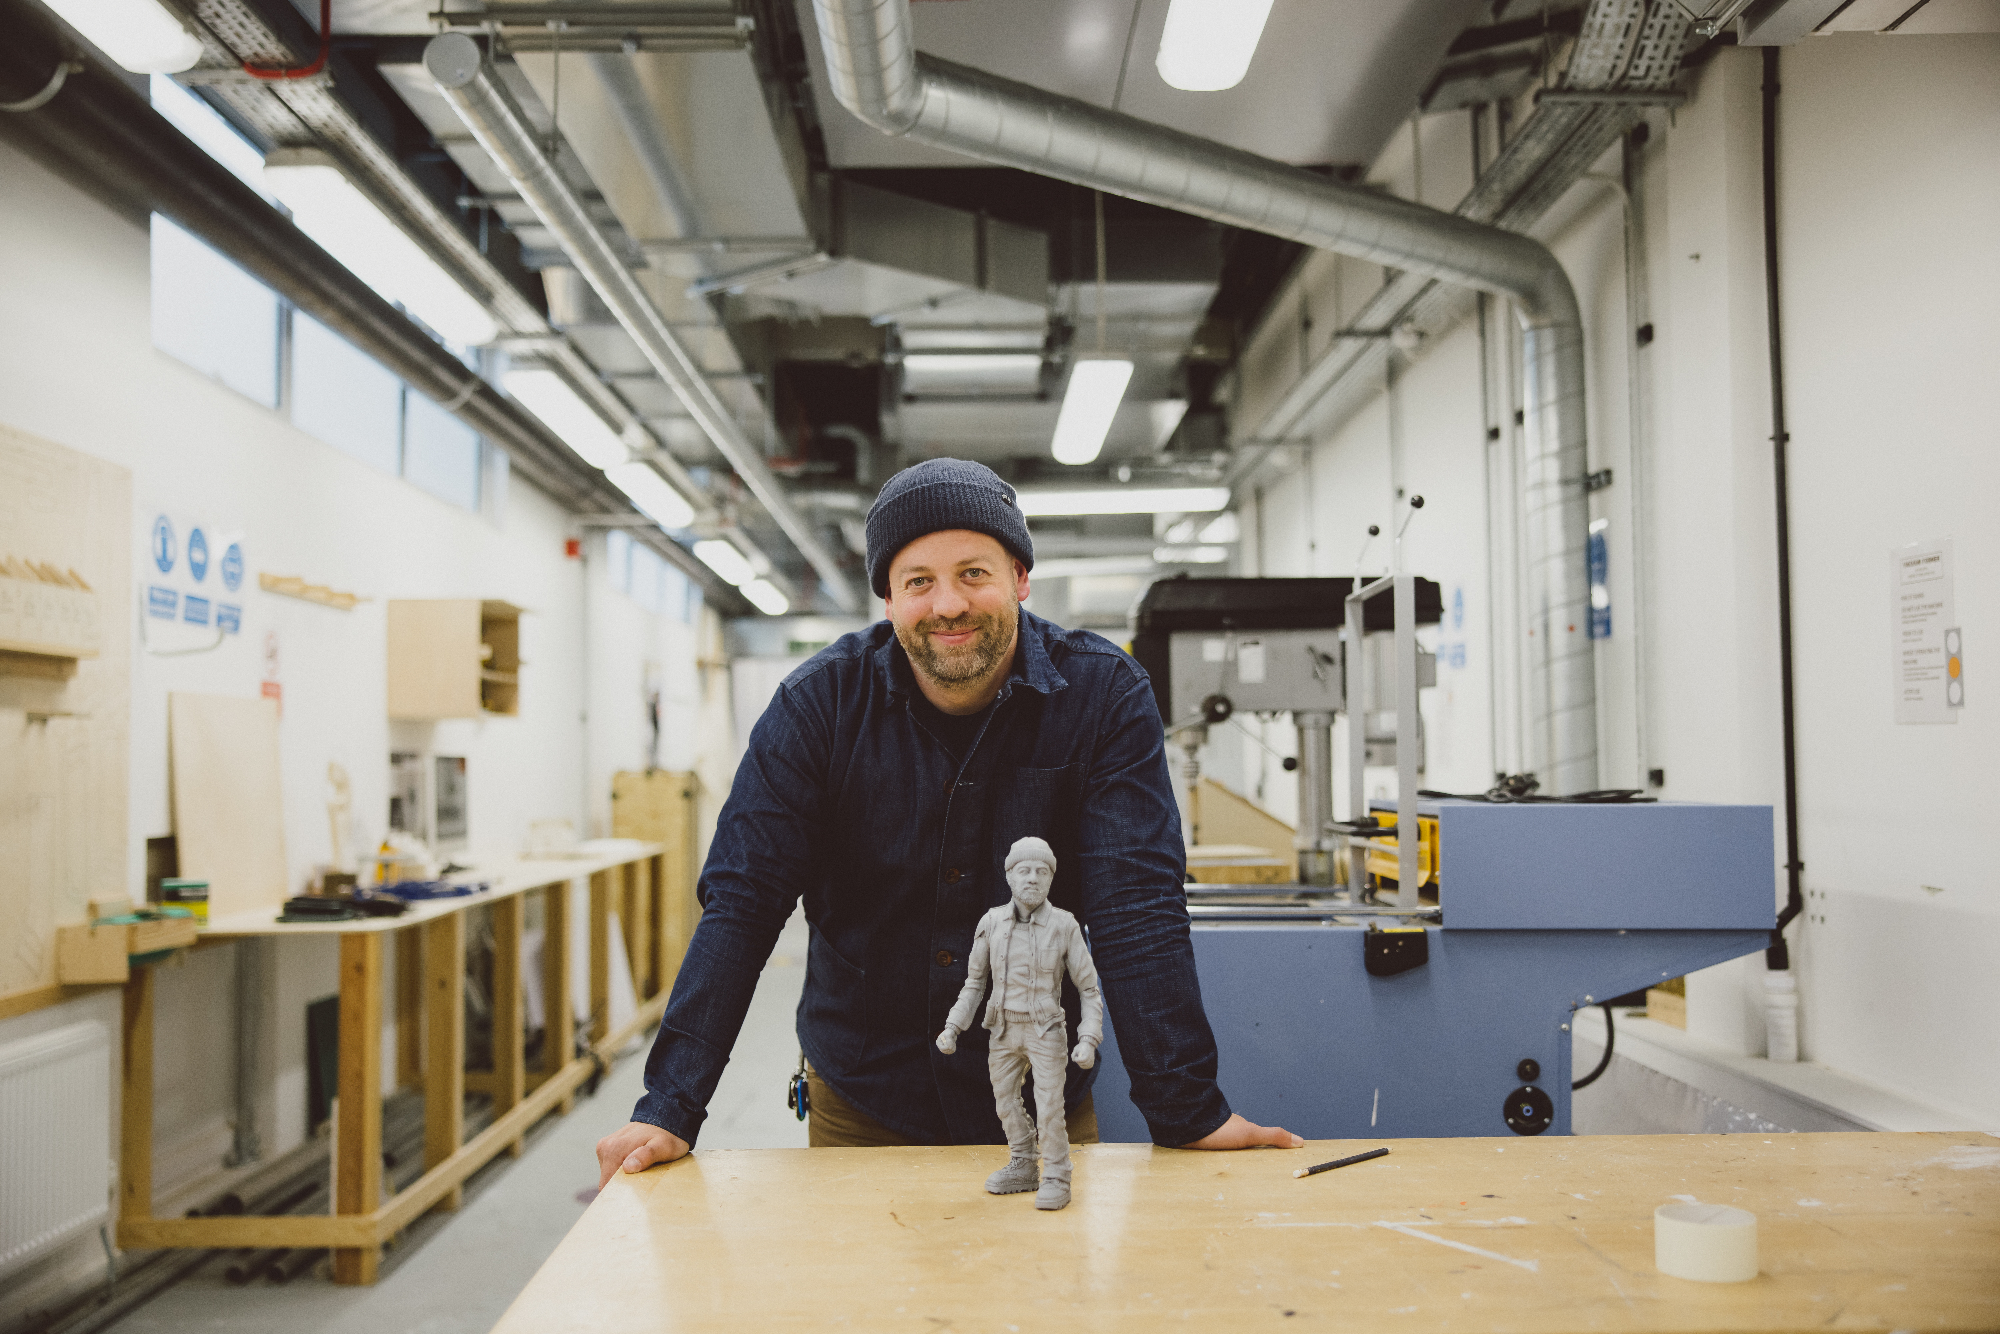 Andy McDowall in 3D workshop with small 3D model of himself